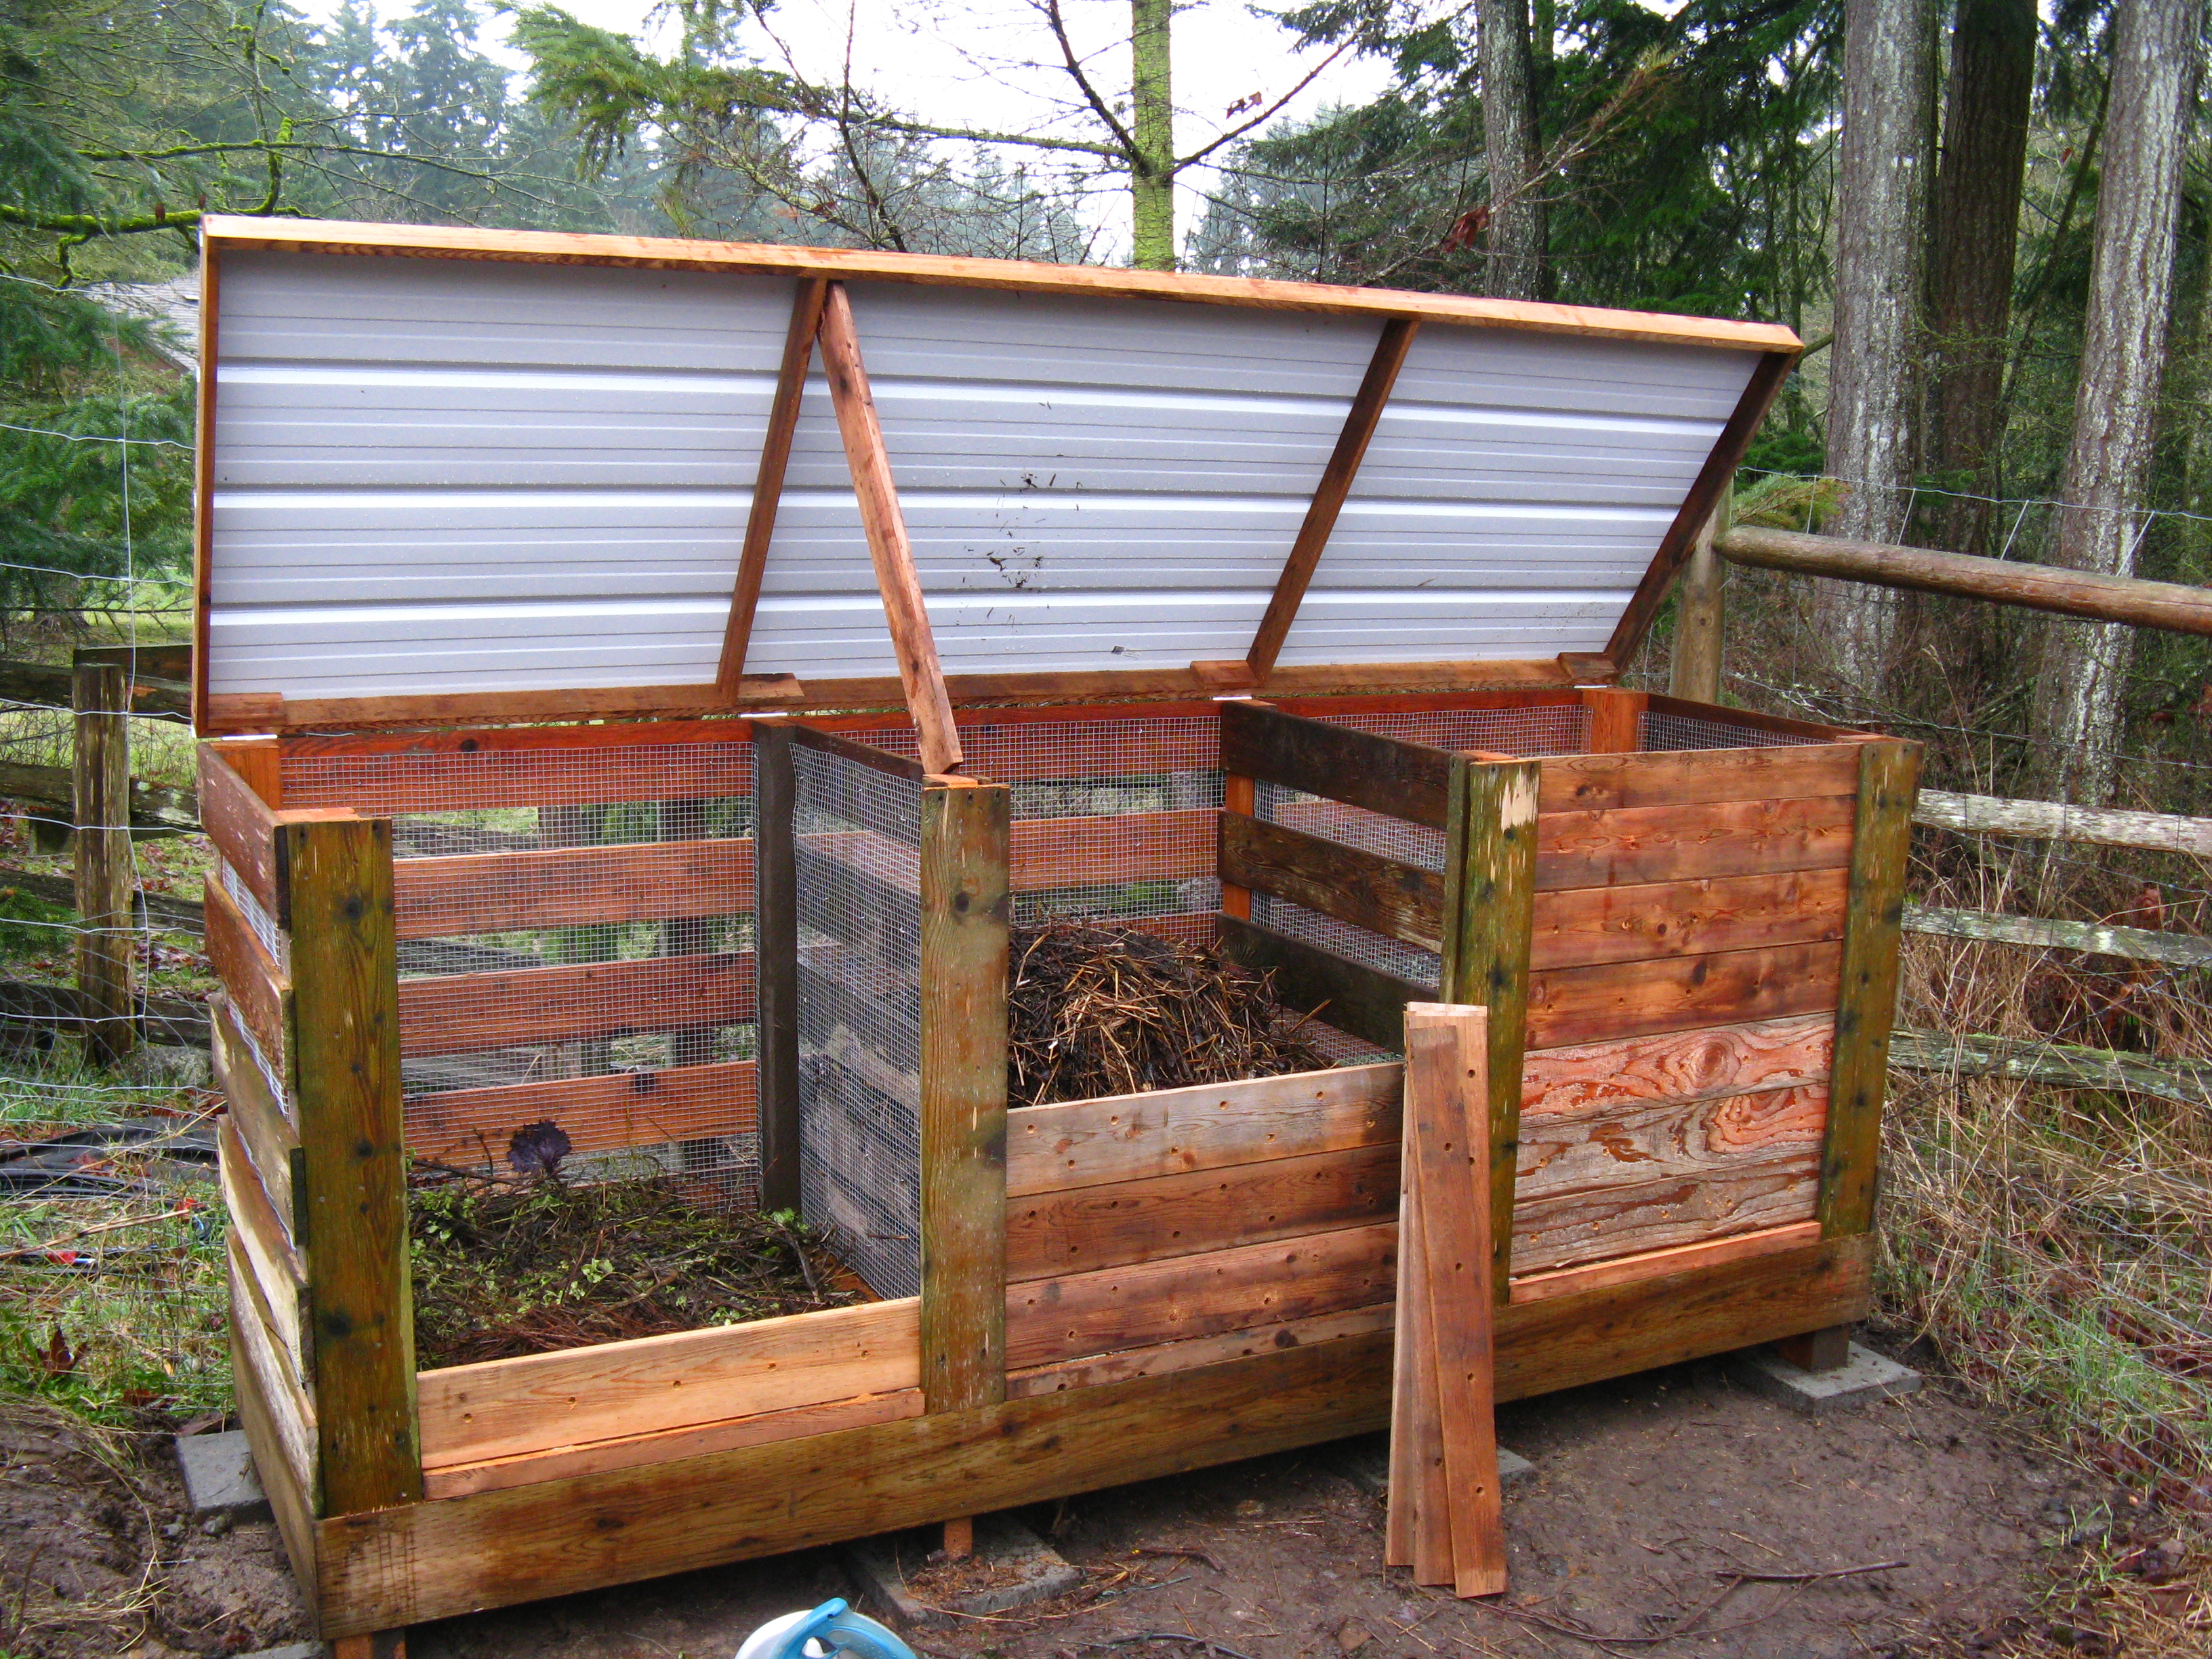 Complete! New metal roof, and compost curing in its new home.